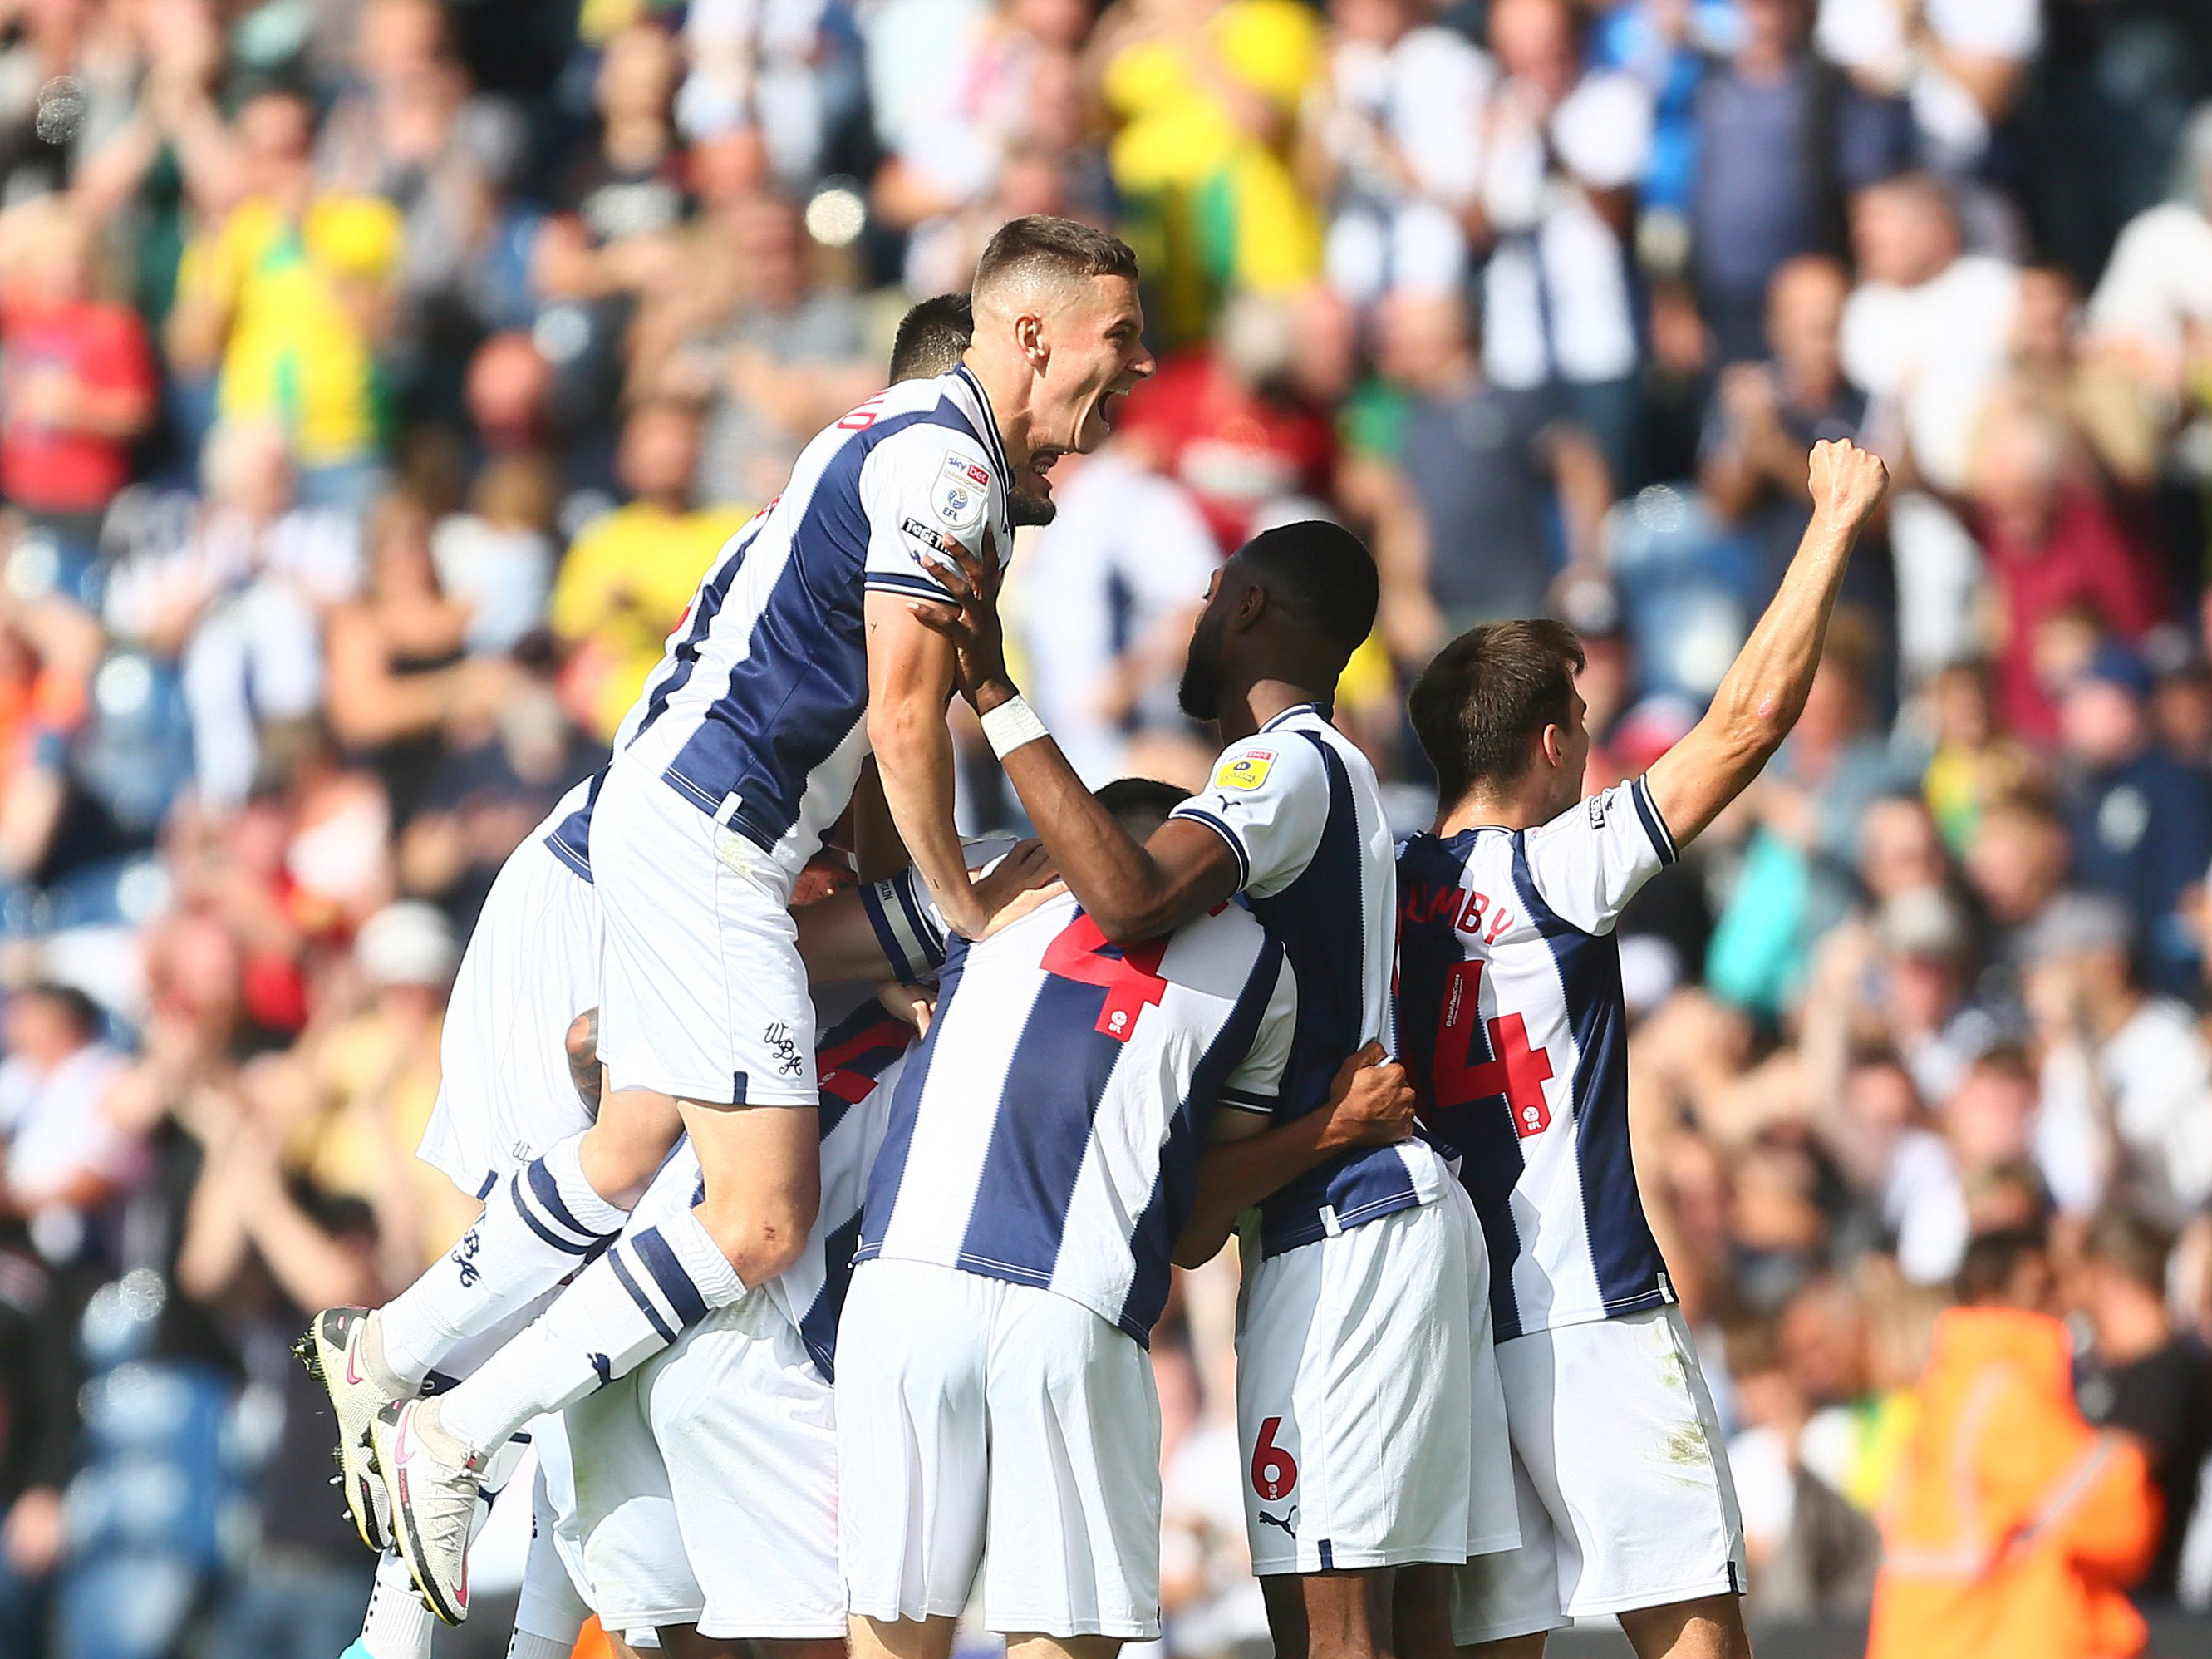 Albion emphatically beat Hull City 5-2 at The Hawthorns